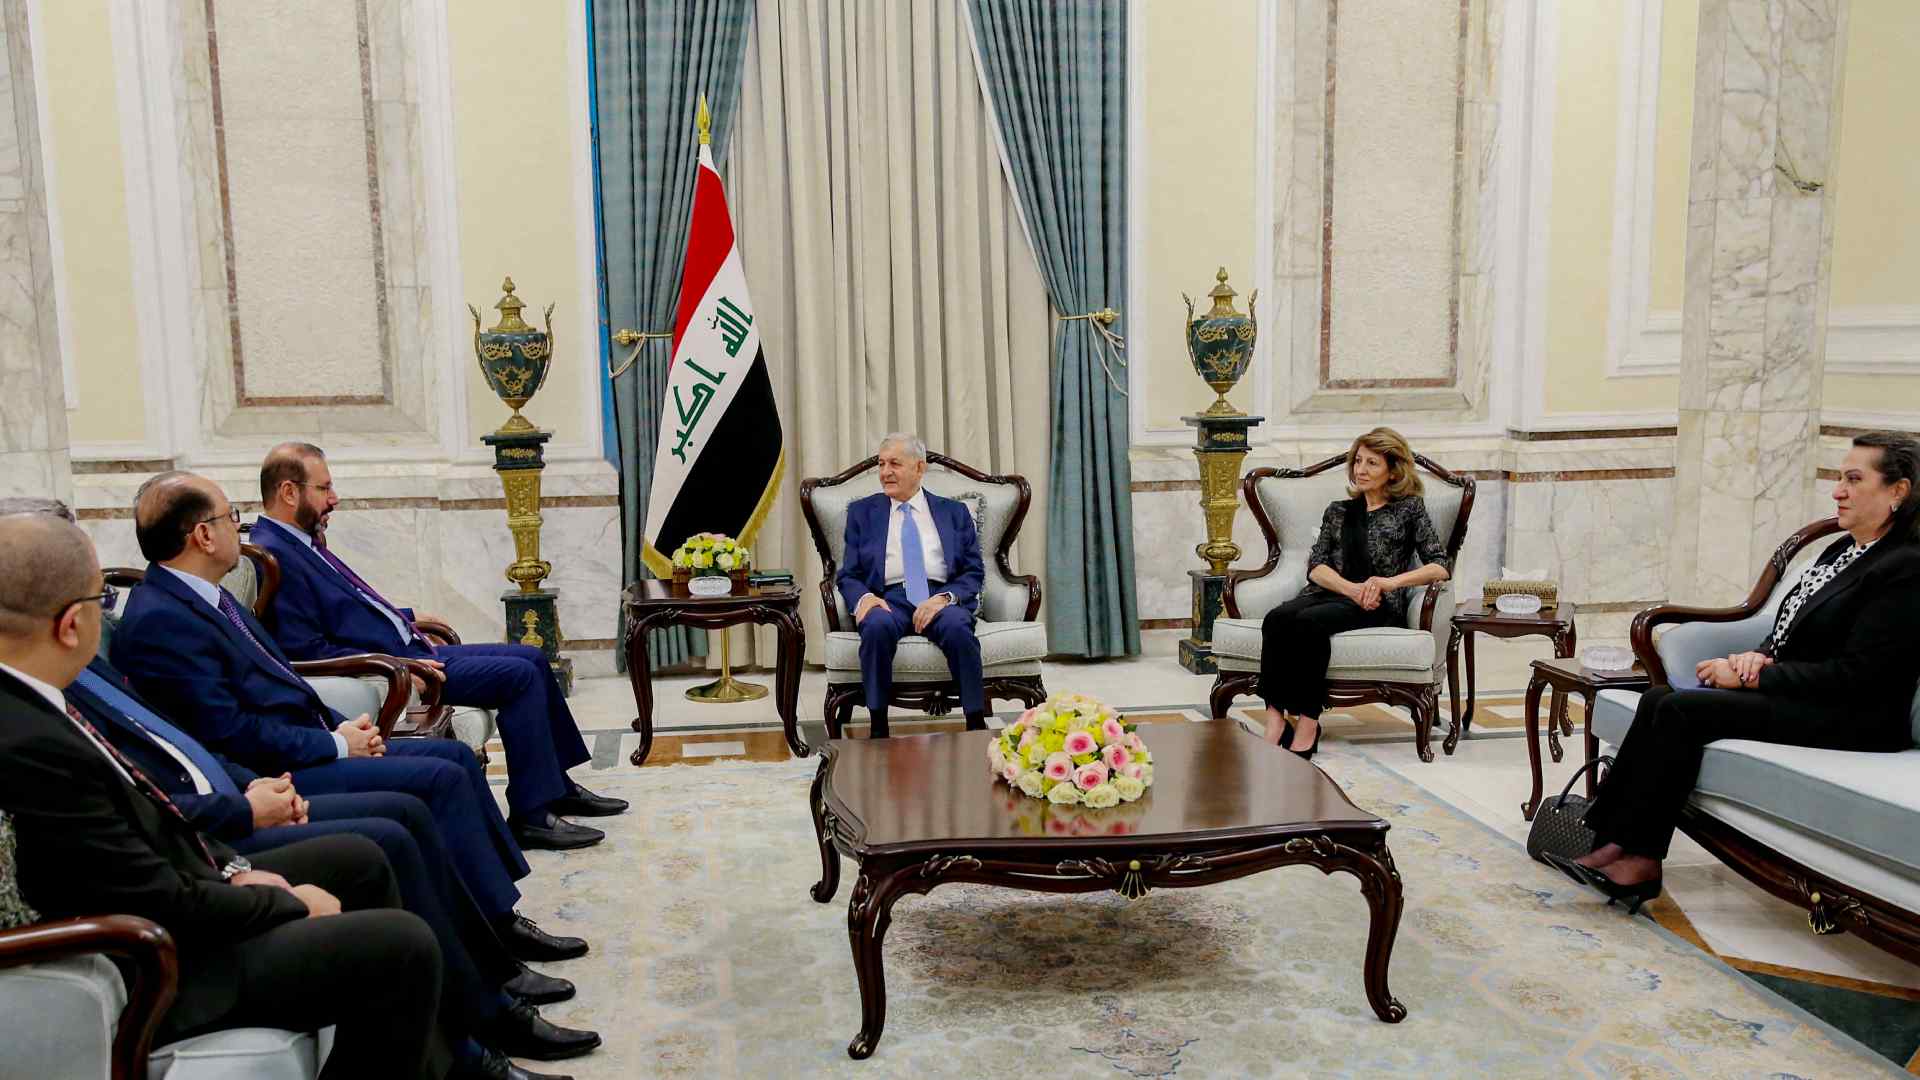 Iraqi President and First Lady's meeting with the Head of the Foundation of Martyrs.